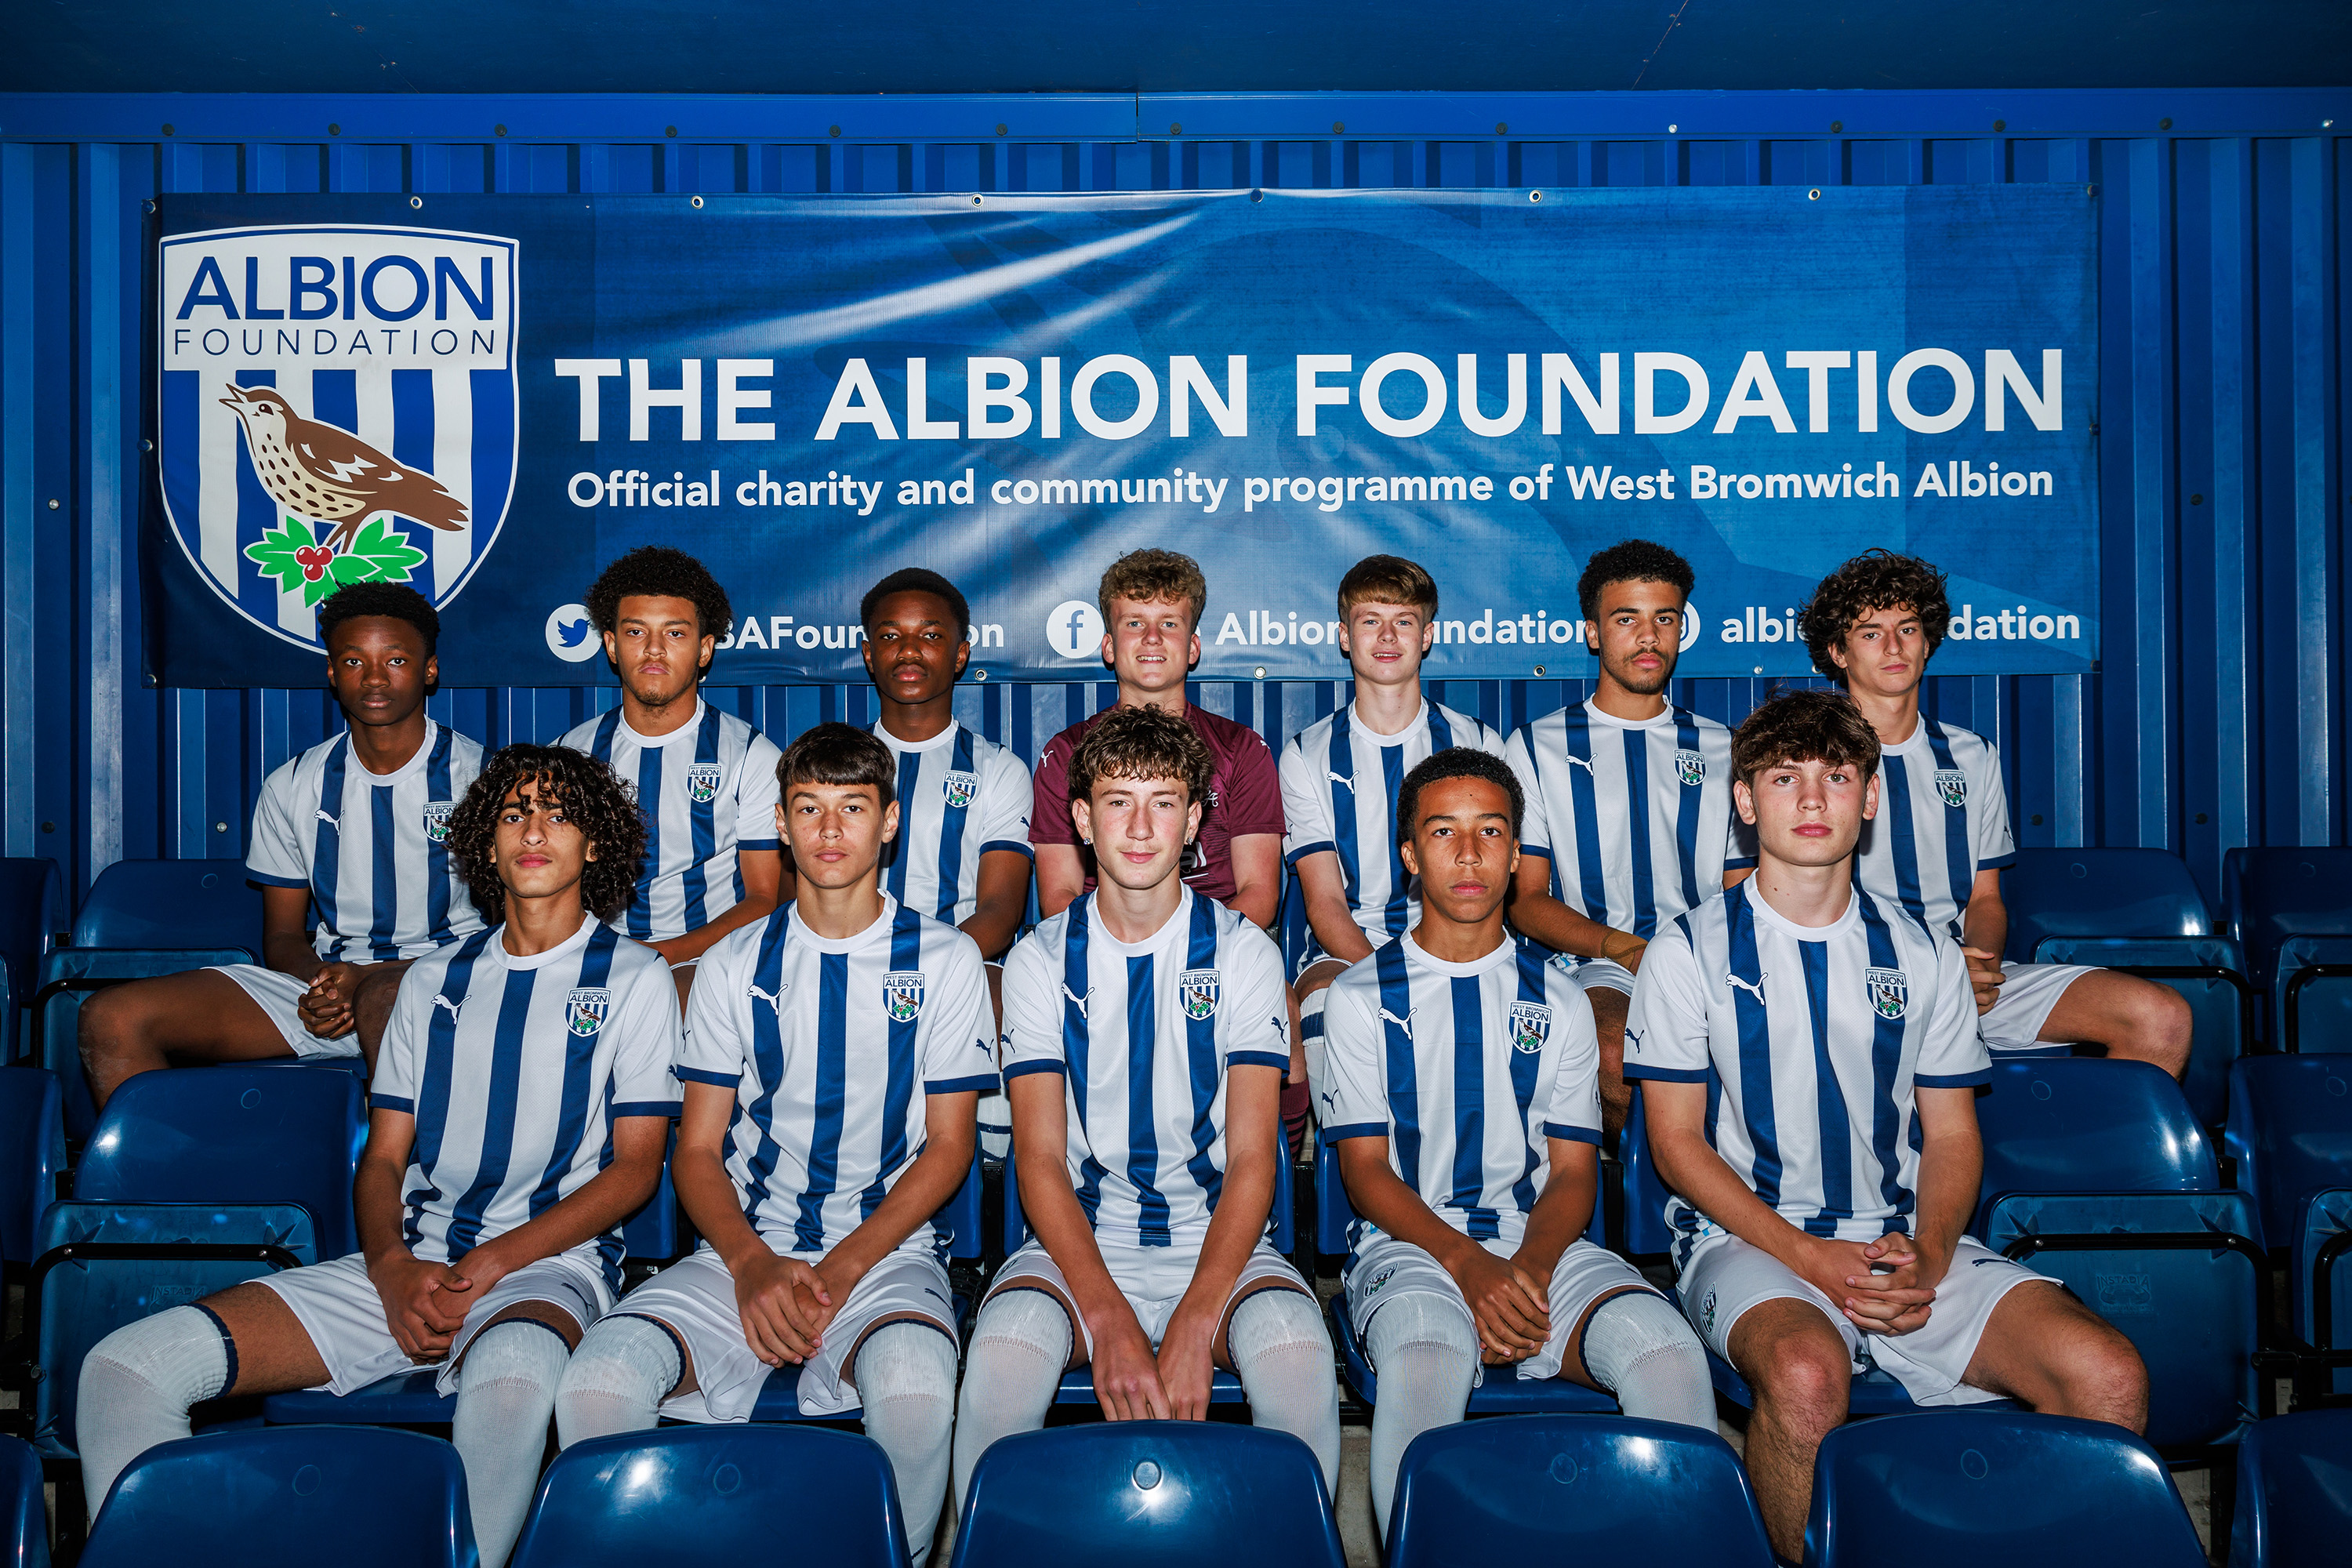 MJPL U16 team seating in the stands under an Albion Foundation banner.